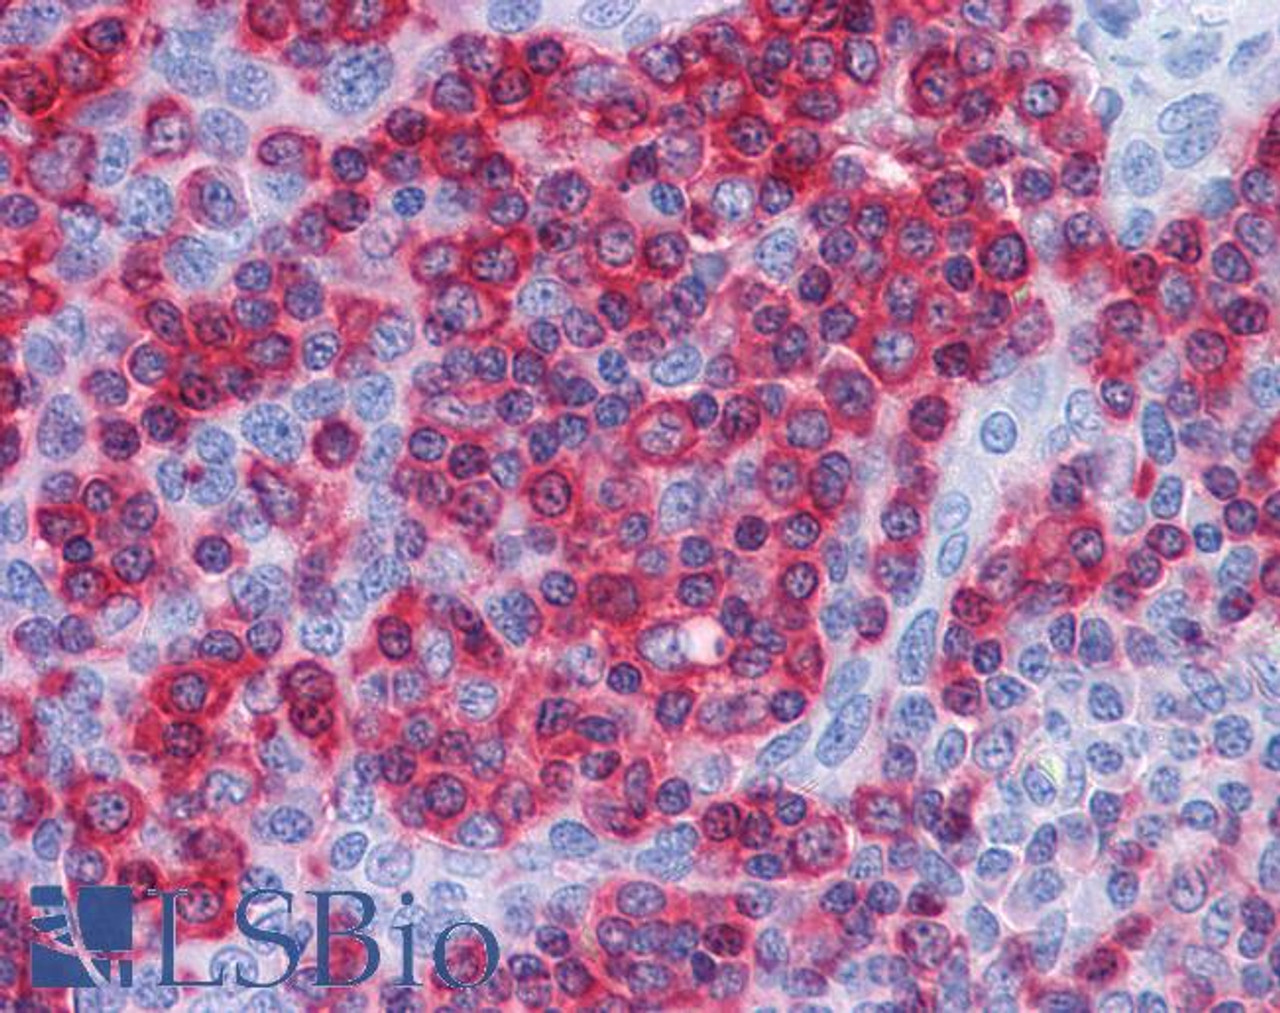 46-228 (3.75ug/ml) staining of paraffin embedded Human Kidney. Steamed antigen retrieval with citrate buffer pH 6, AP-staining.